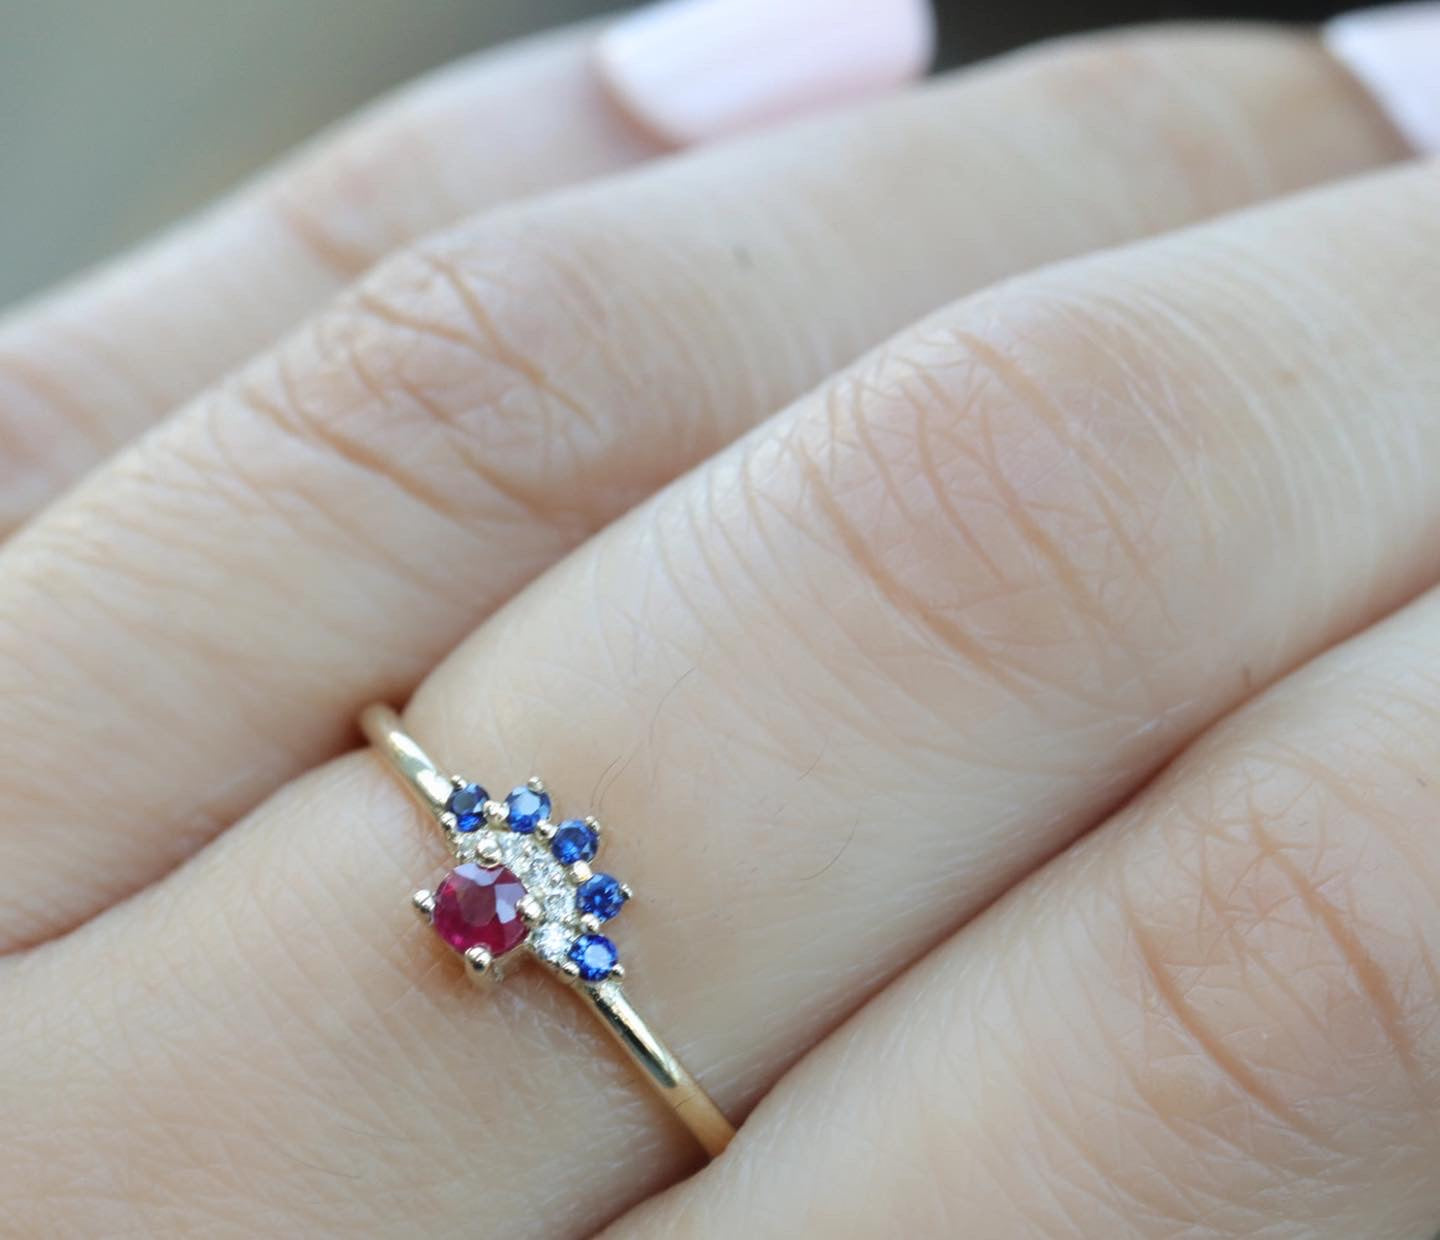 Solid 14k gold fan ring with ruby, sapphire and diamond